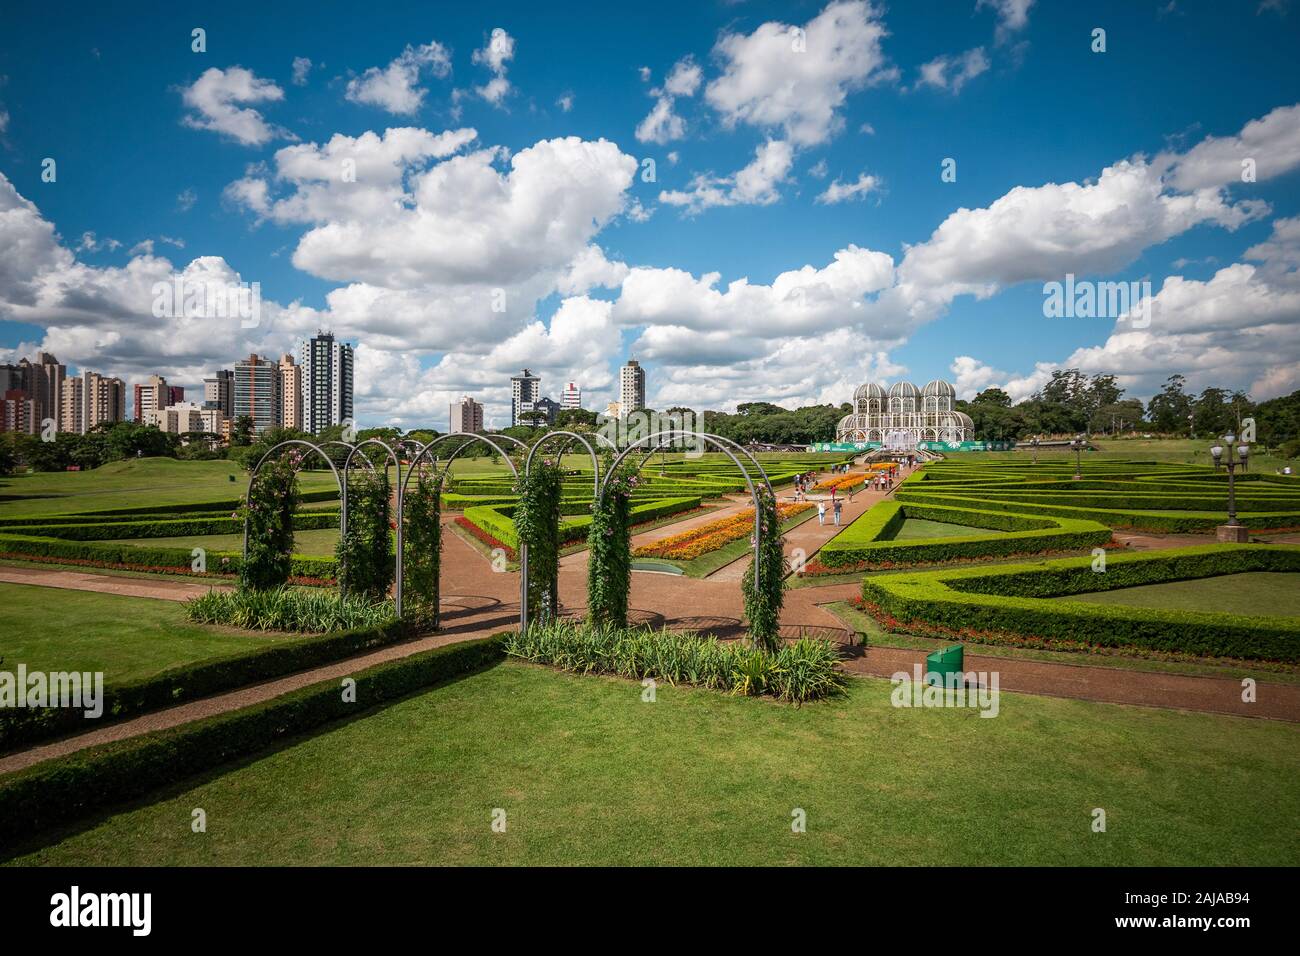 Botanical Gardens of Curitiba on a sunny day in Curitiba, the capital and largest city in the state of Parana, Brazil. Stock Photo